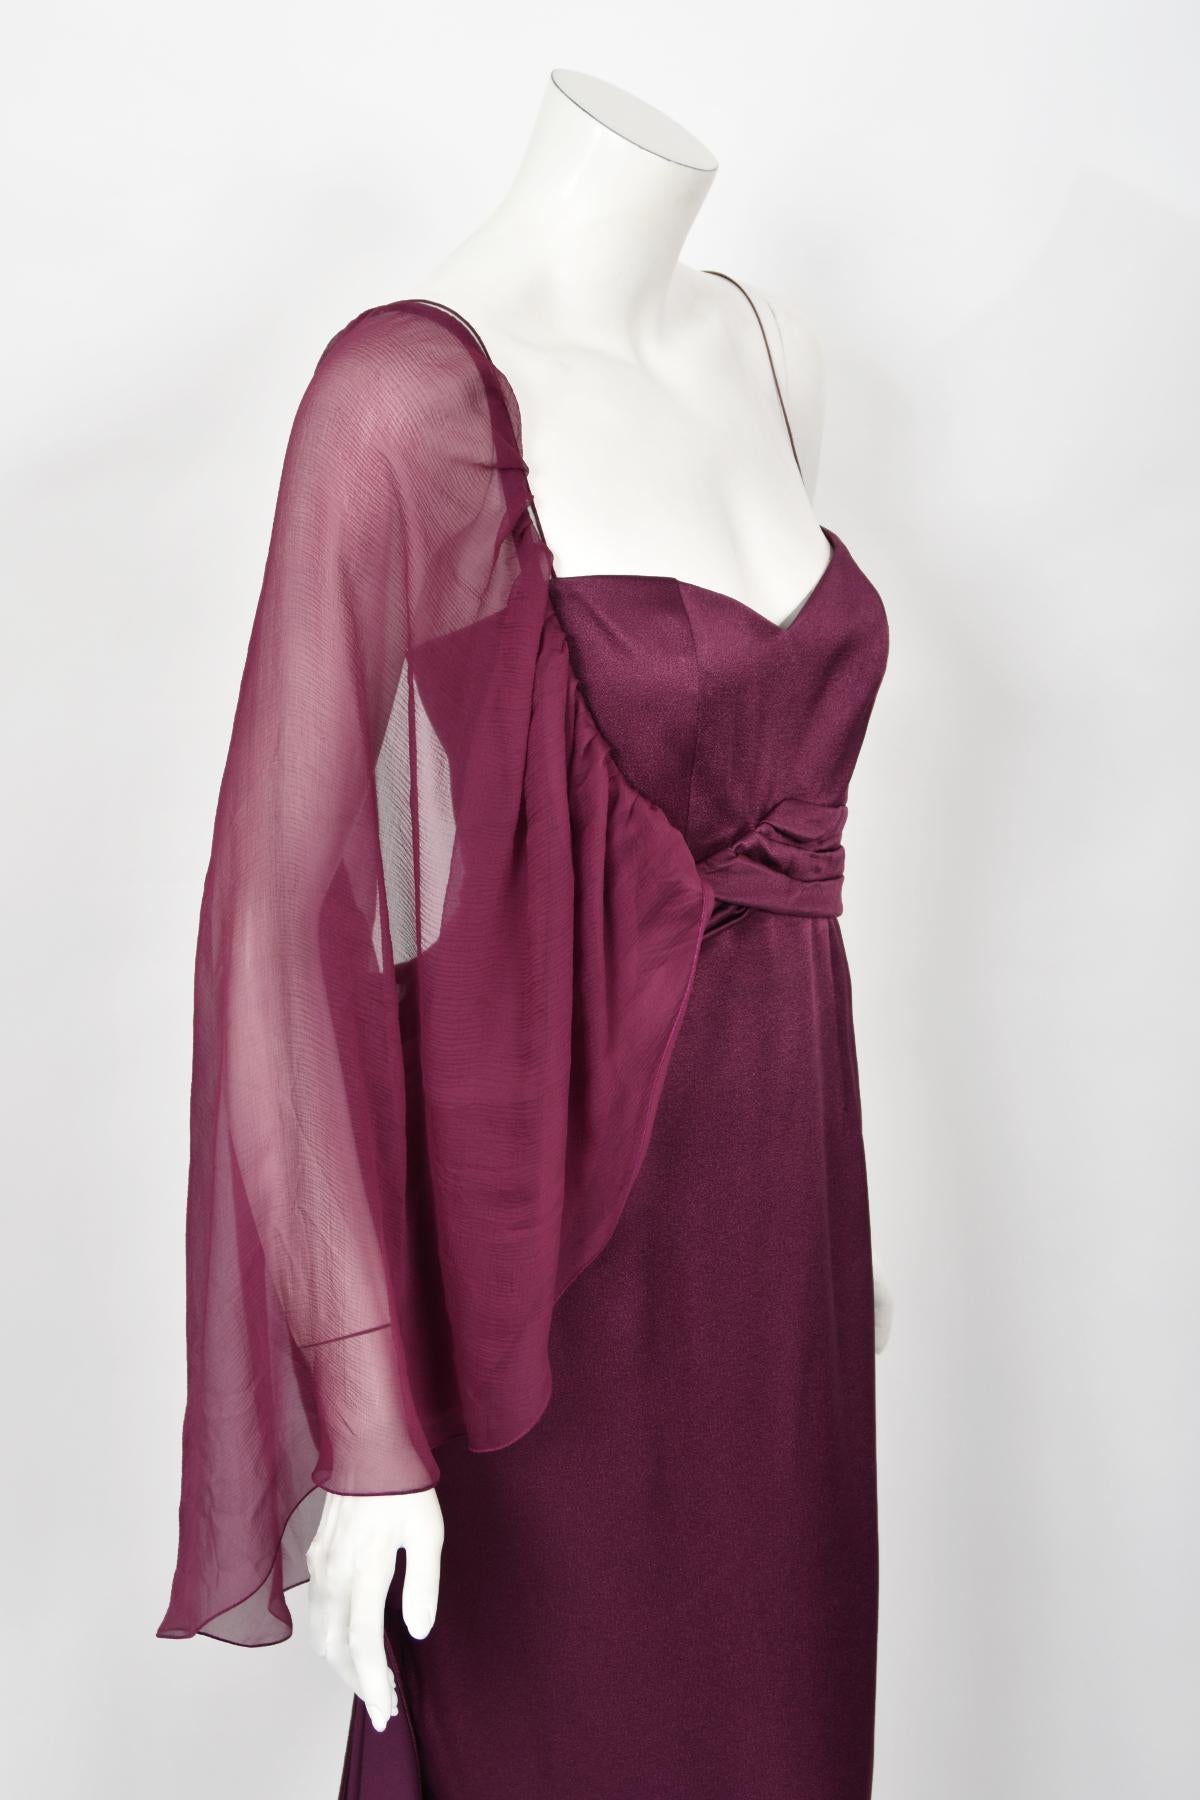 Women's 2000 Christian Dior by Galliano Purple Silk Sheer-Sleeve Asymmetric Draped Gown For Sale